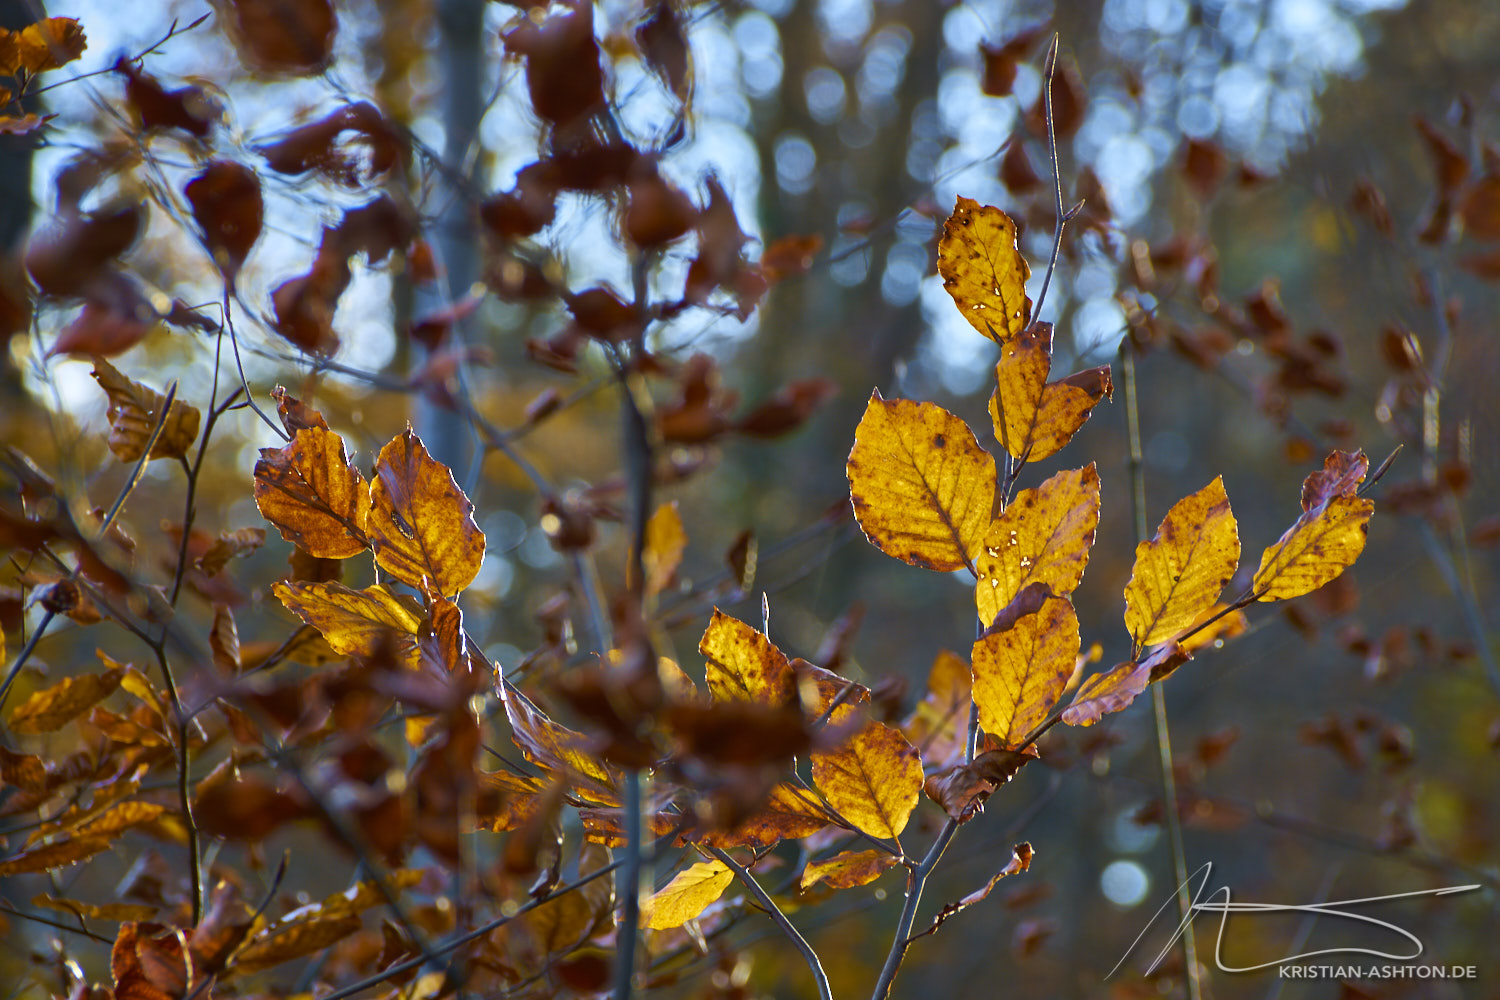 Autumnal impressions of the Silberwald